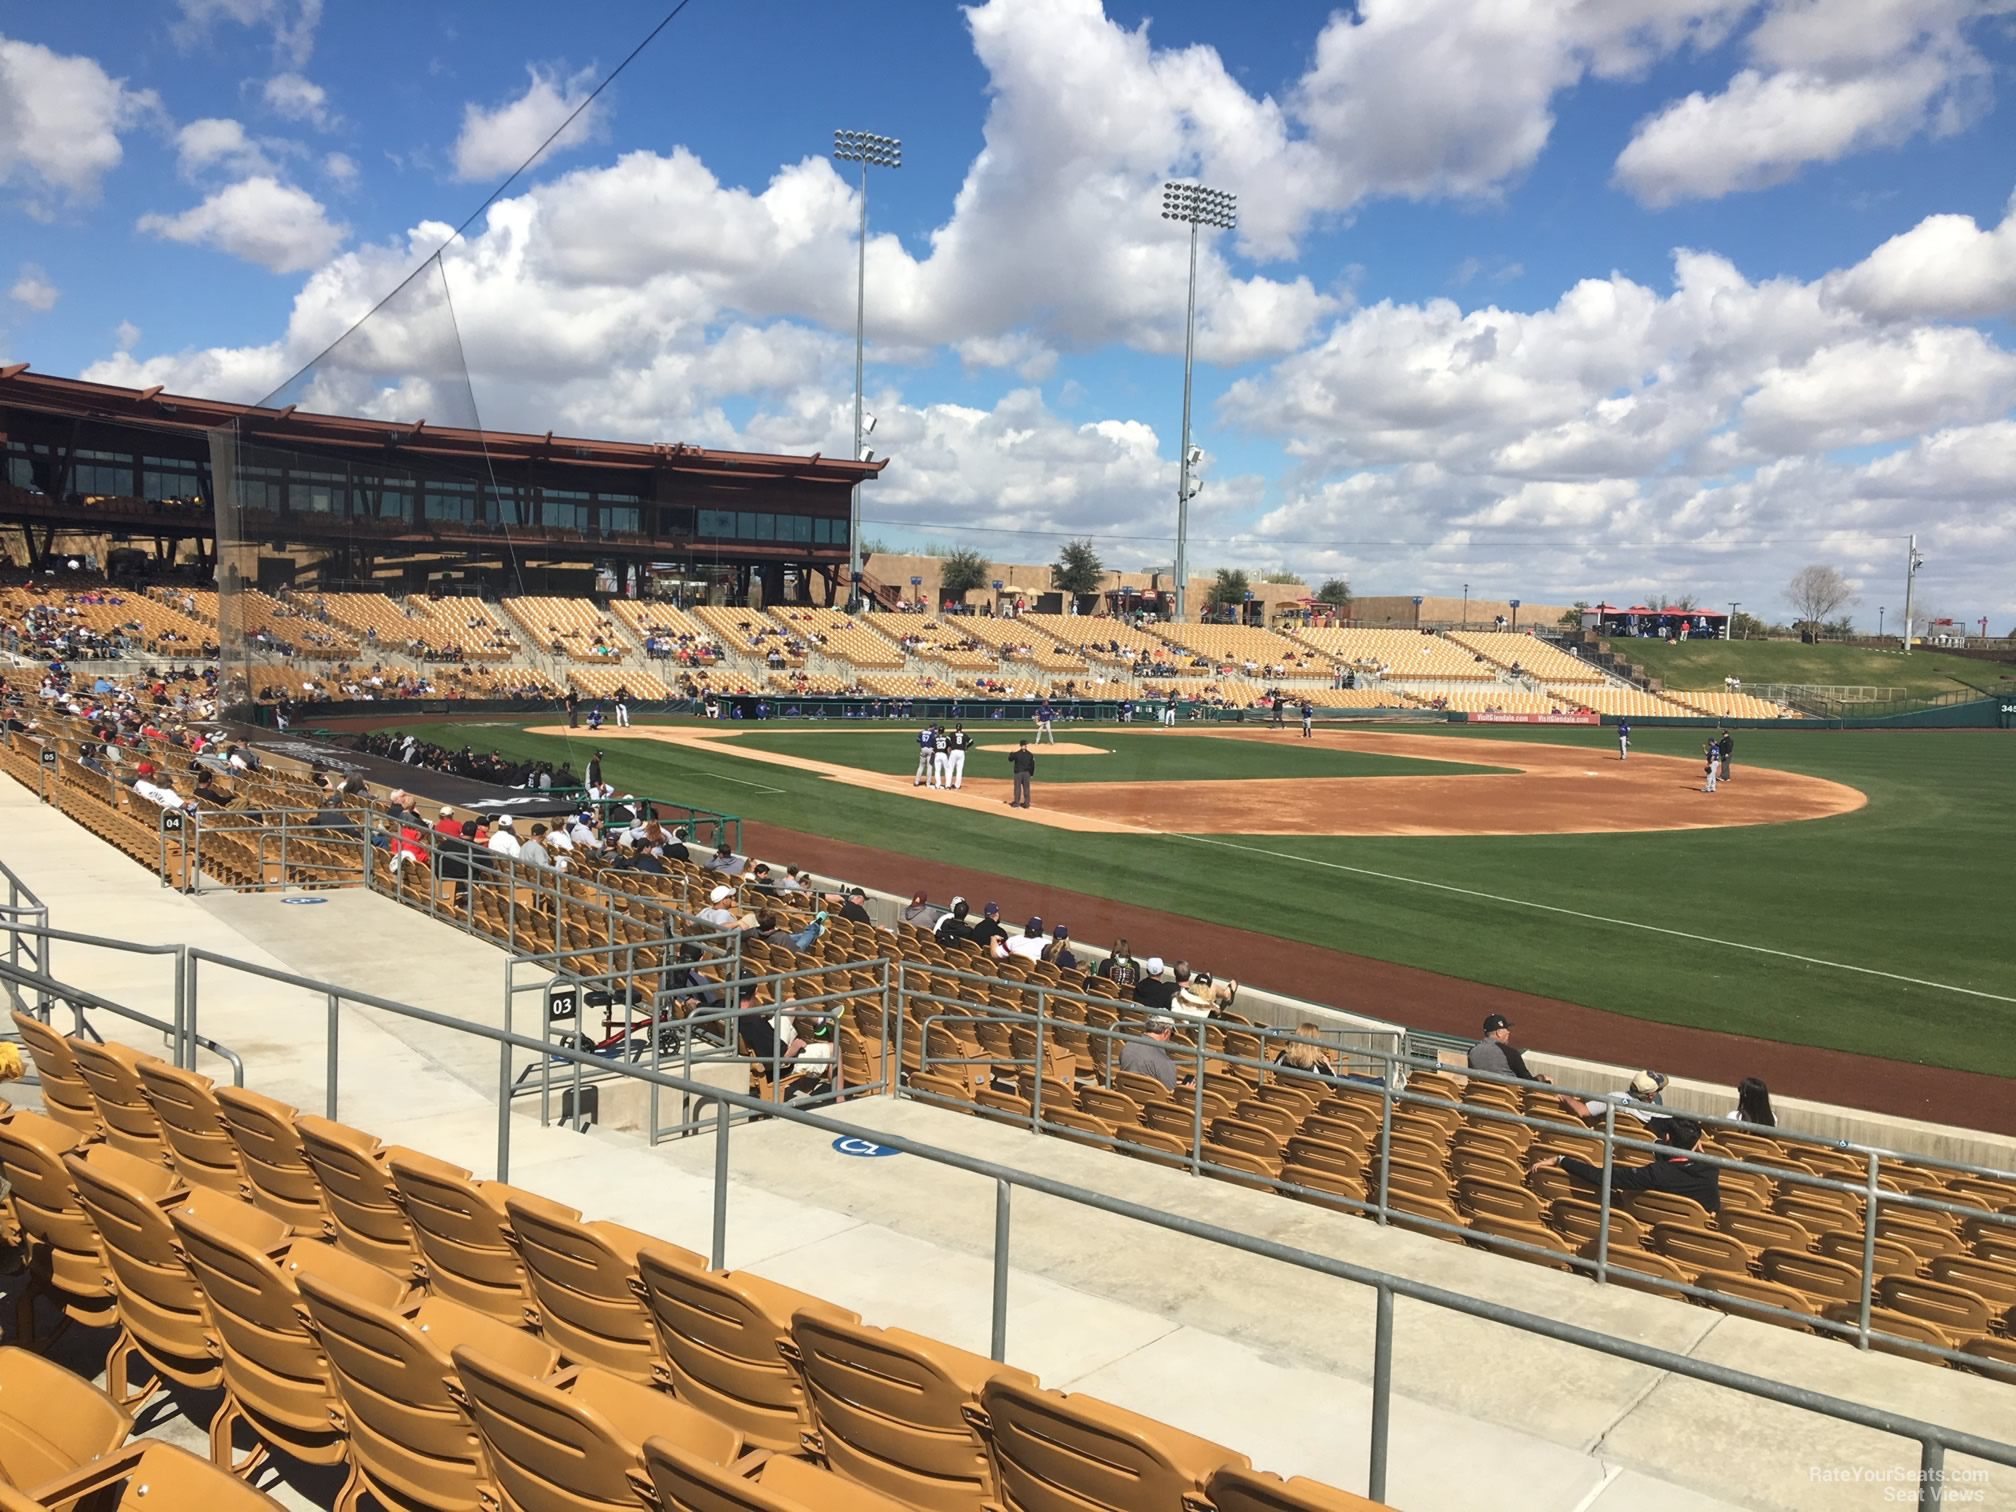 section 103, row 5 seat view  - camelback ranch